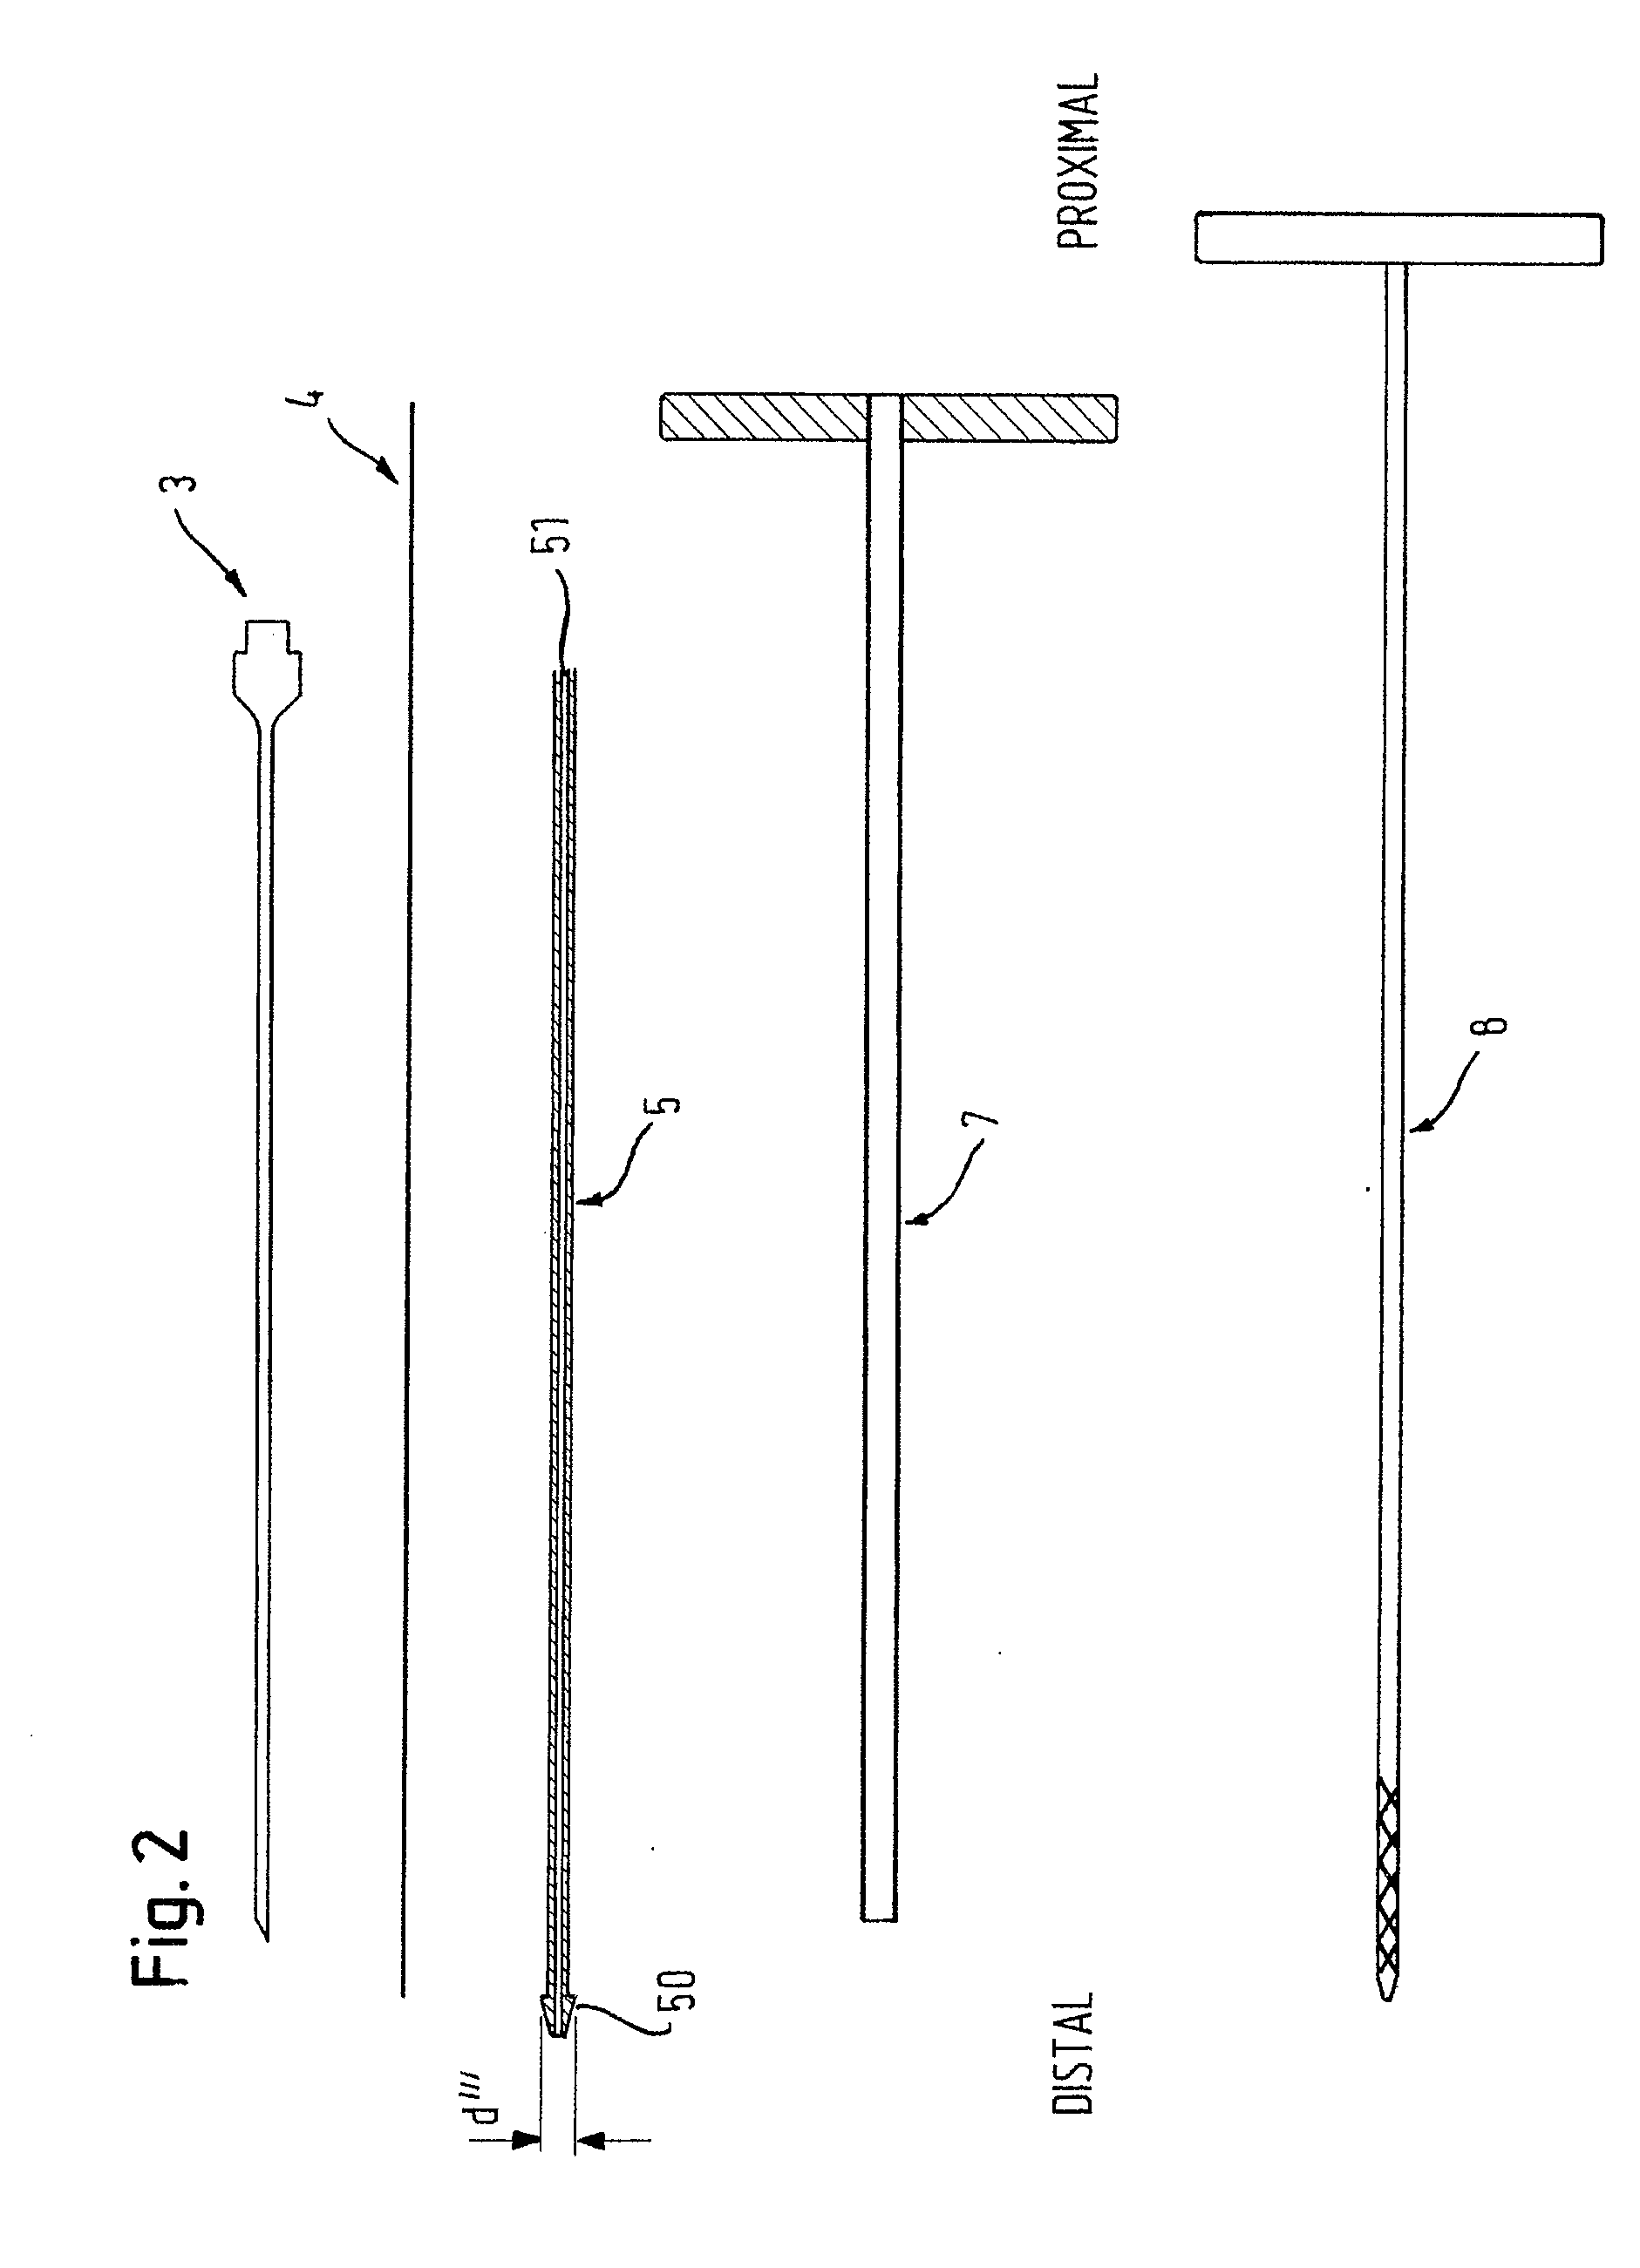 Surgical drill, a set of surgical drills, a system for cutting bone and a method for removing bone